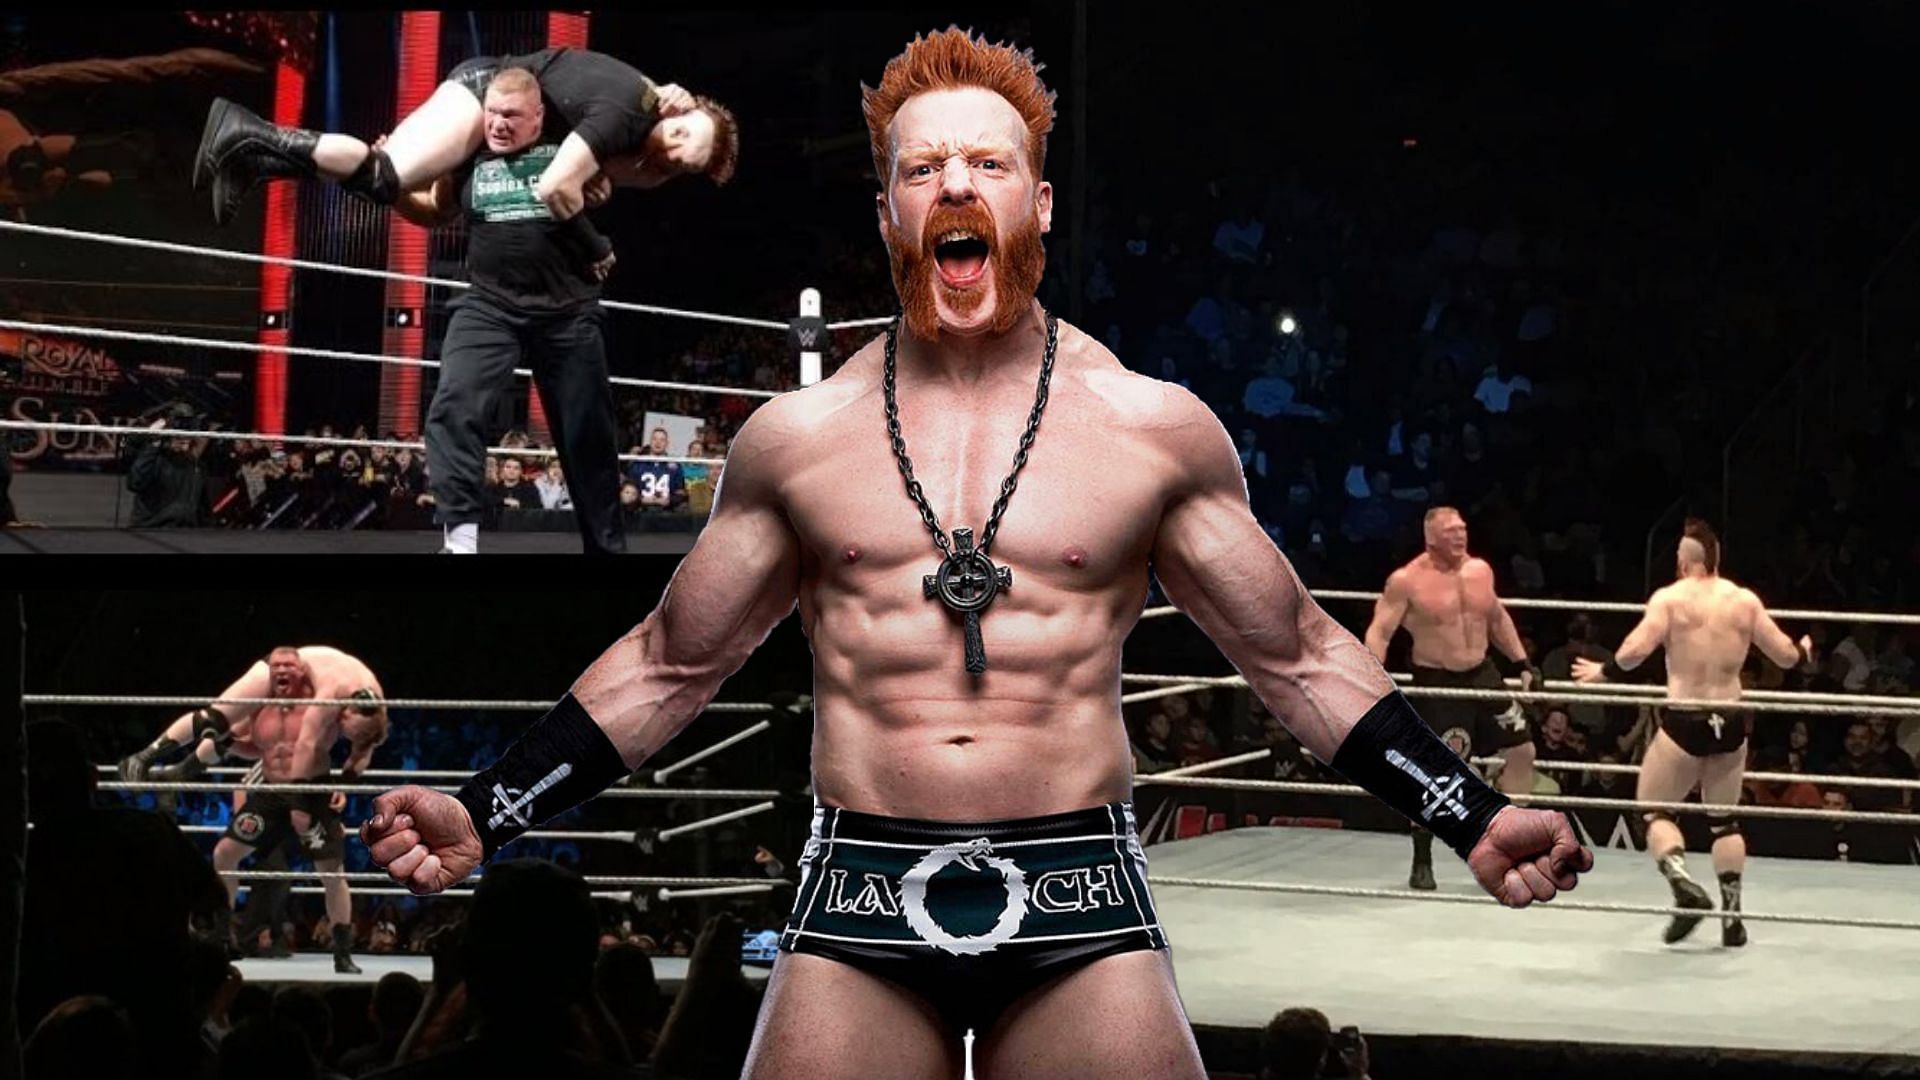 Sheamus and Brock Lesnar wrestled live events in 2016 and 2017